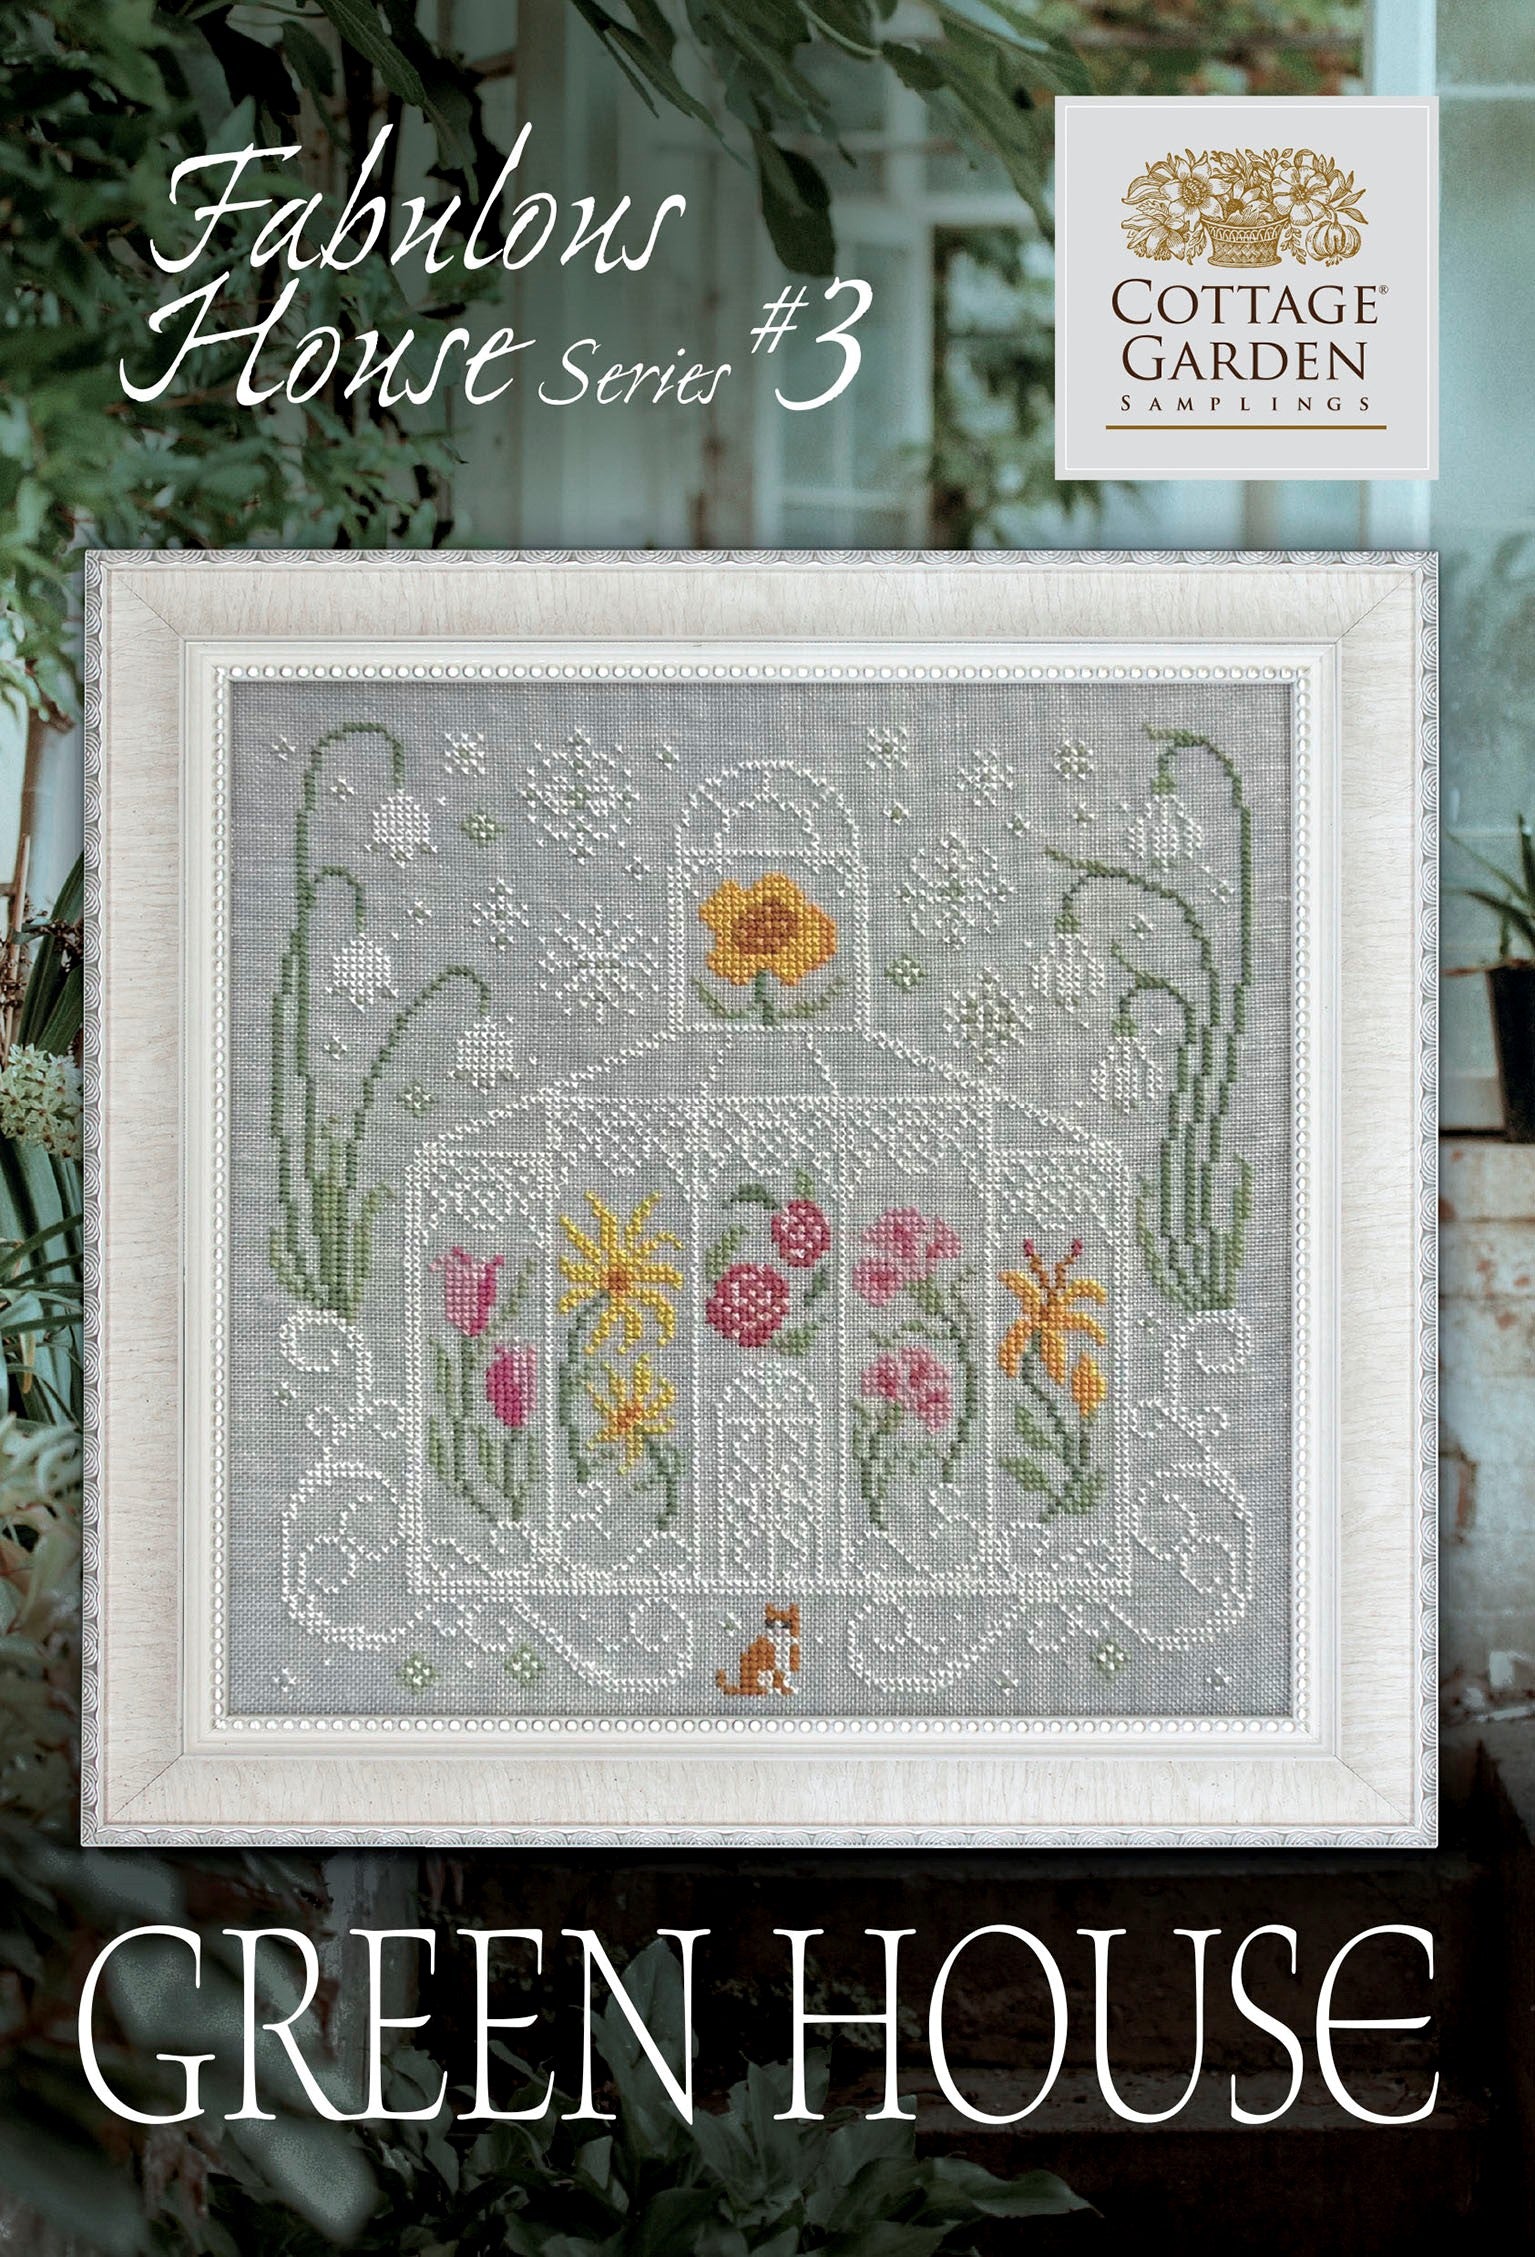 Green House-  Fabulous House Series #3 by Cottage Garden Samplings